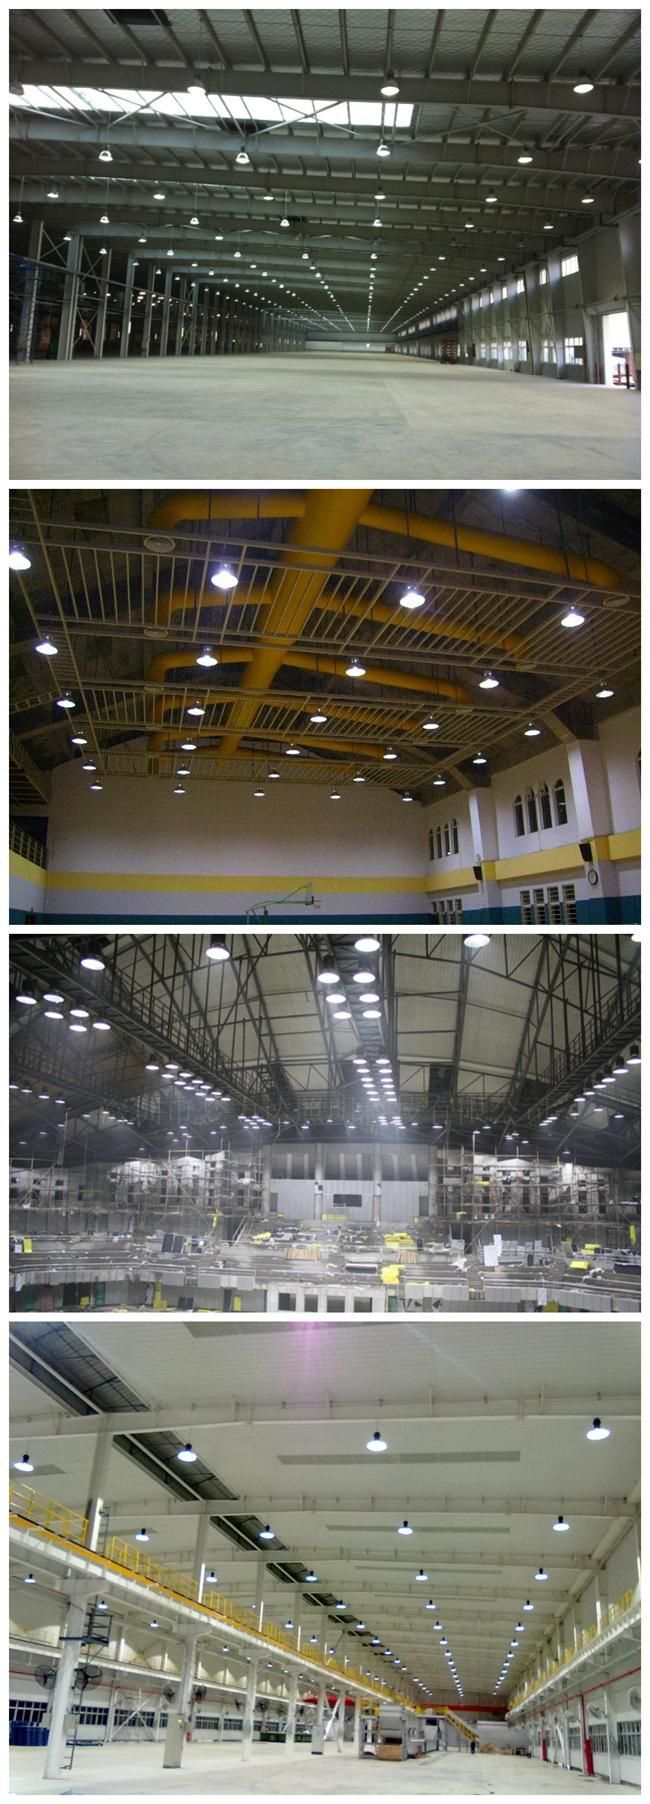 Good Quality LED Industrial Light with Alu Shell UFO LED High Bay Light